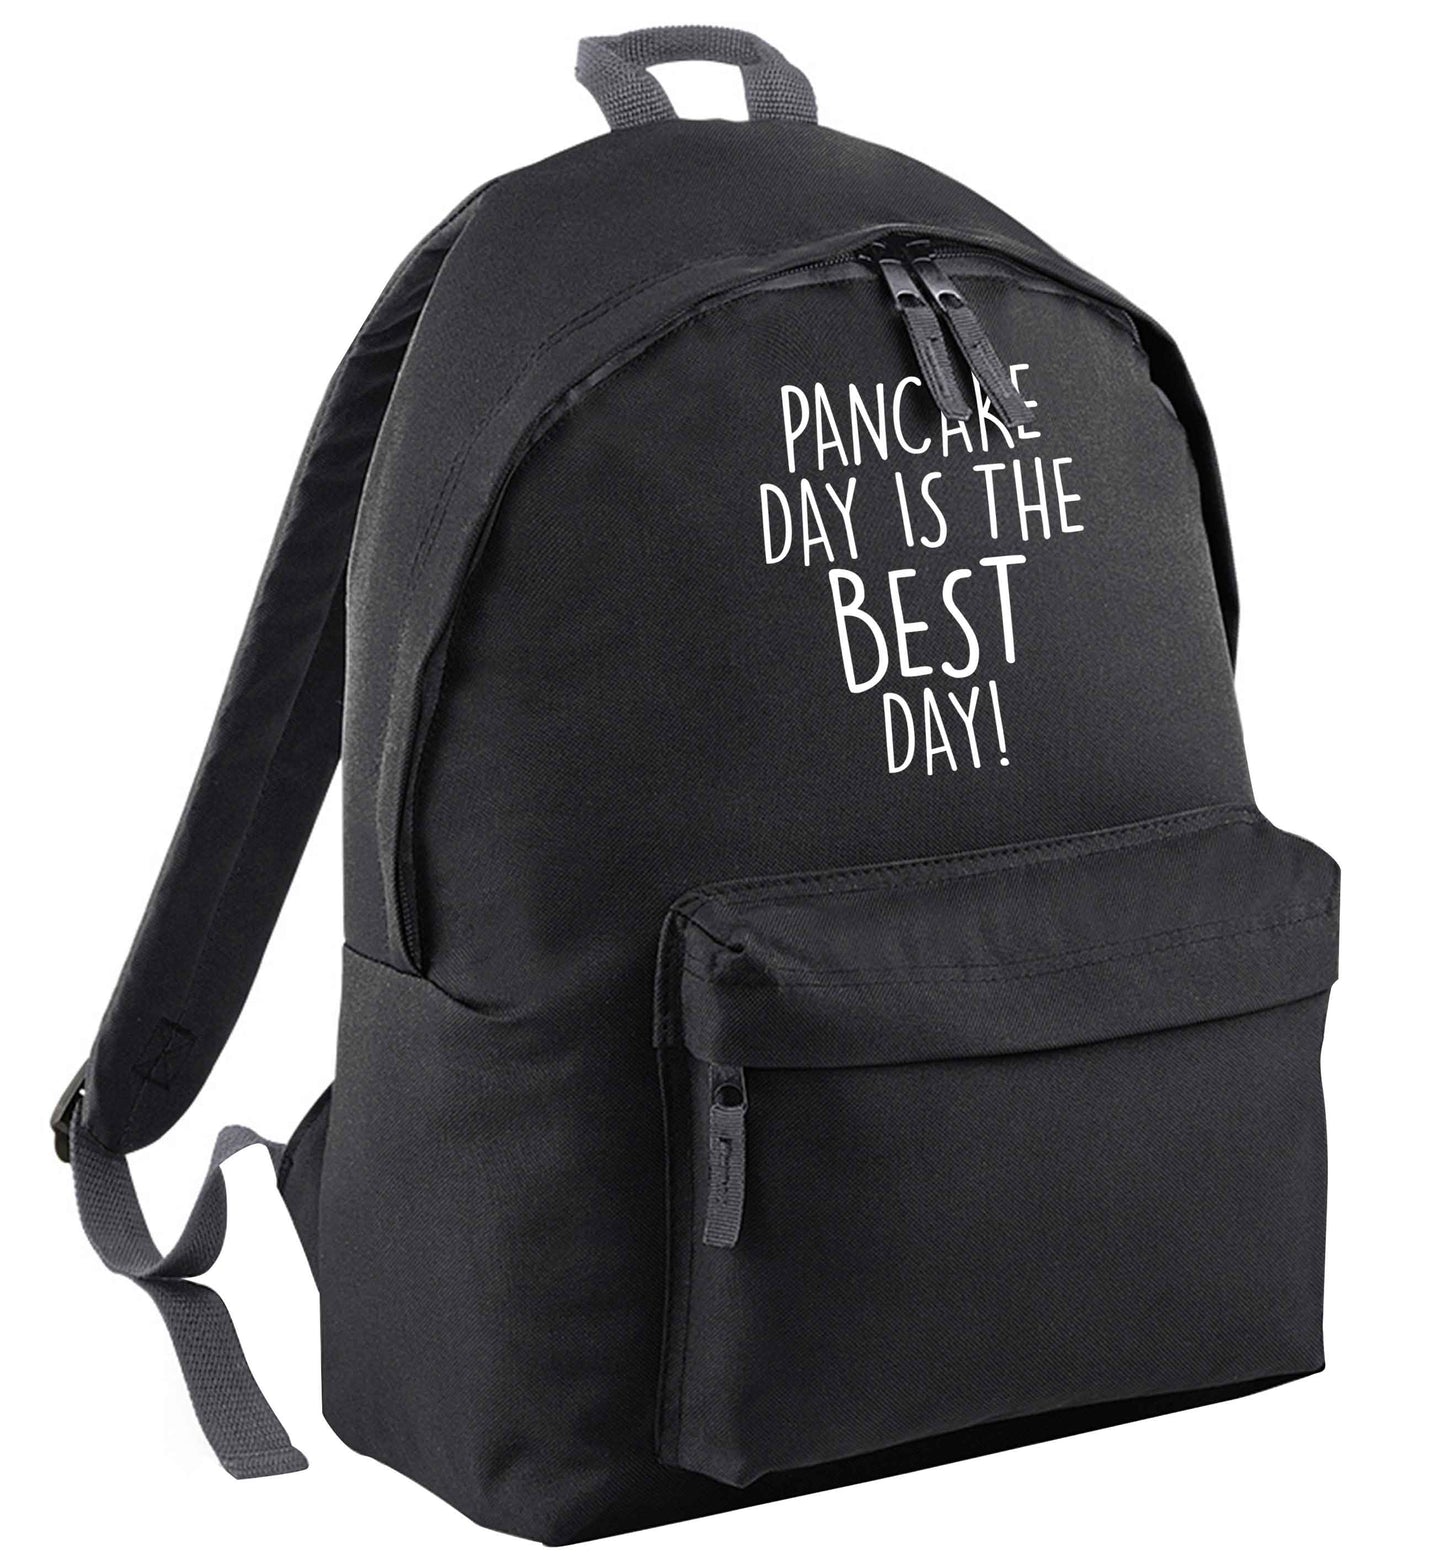 Pancake day is the best day | Children's backpack